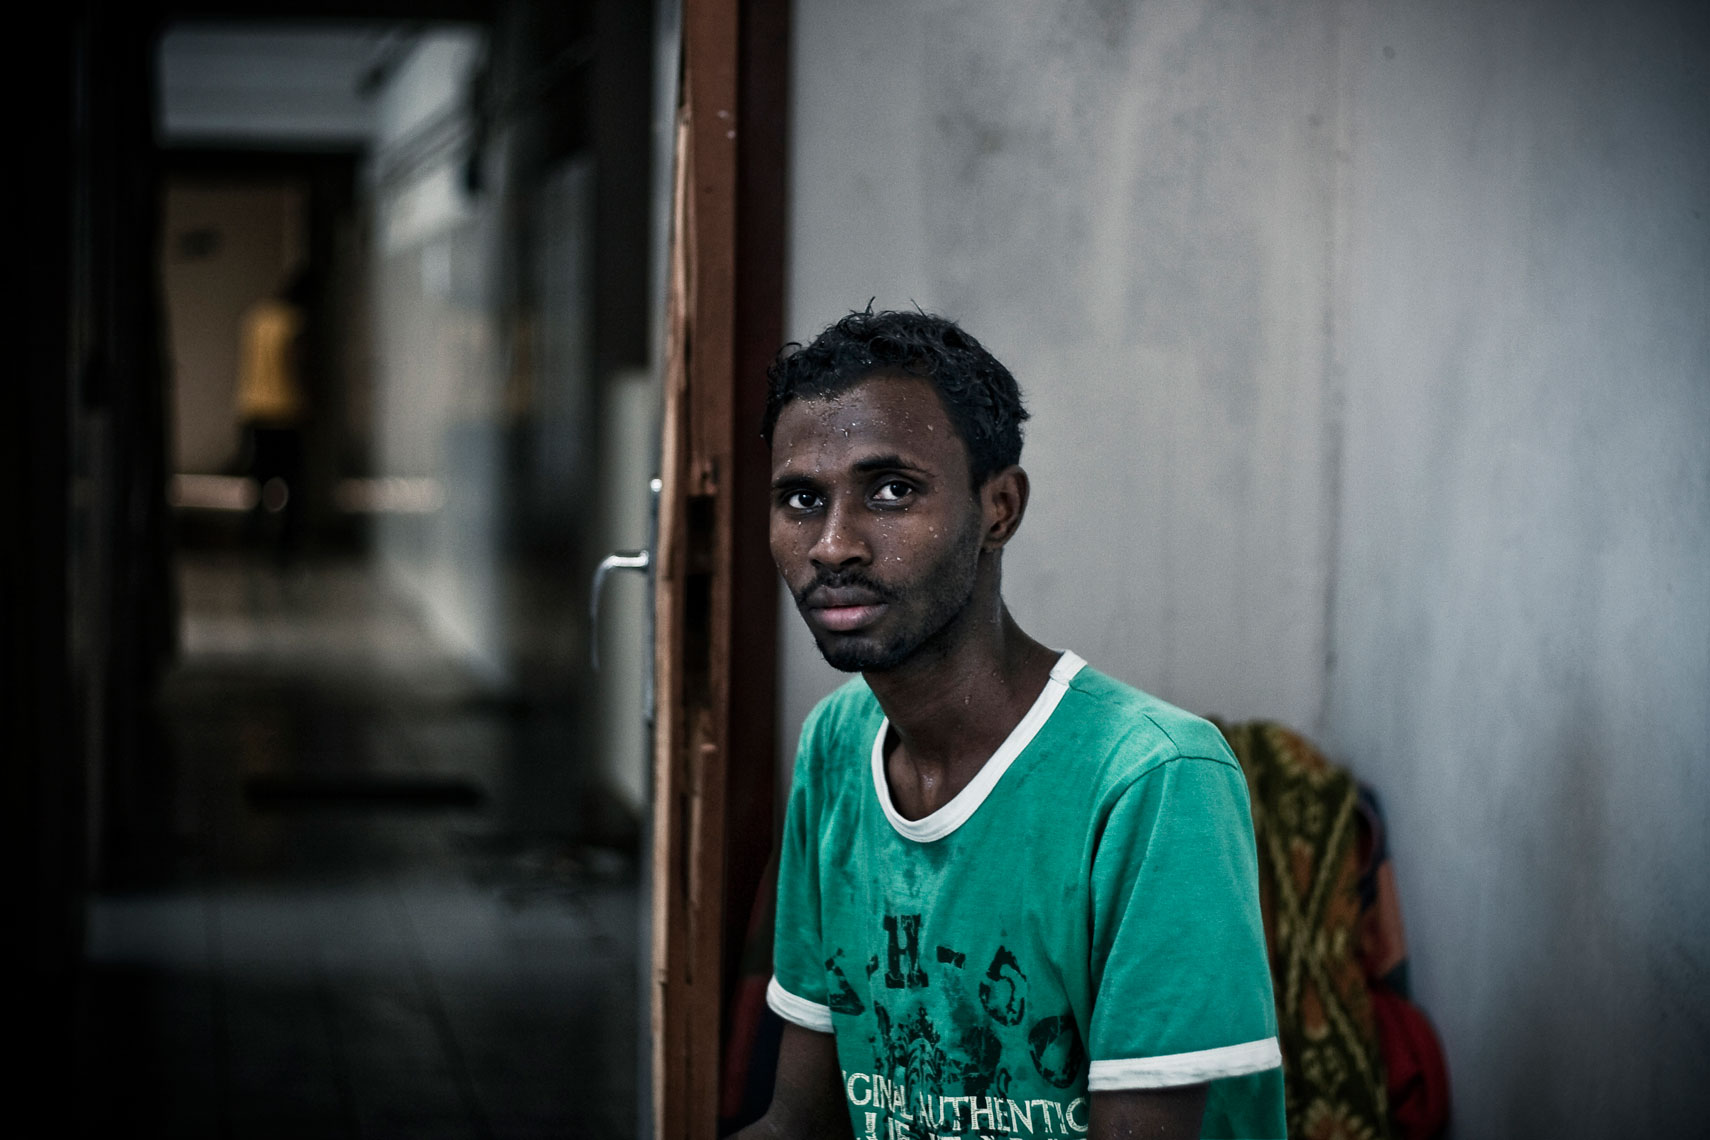 ITALY. Florence, 21st July 2009. A somali refugee inside the "Kulanka" building. "Kulanka" (assembly in somali langauge) is a former warehouse near the railways, occupied in 2008 by a group of somali refugees together with an association that helps people without home, and gived,  in 2009 , for free temporary loan for use to an association of refugees, in according to a deal signed together with the city mayor.